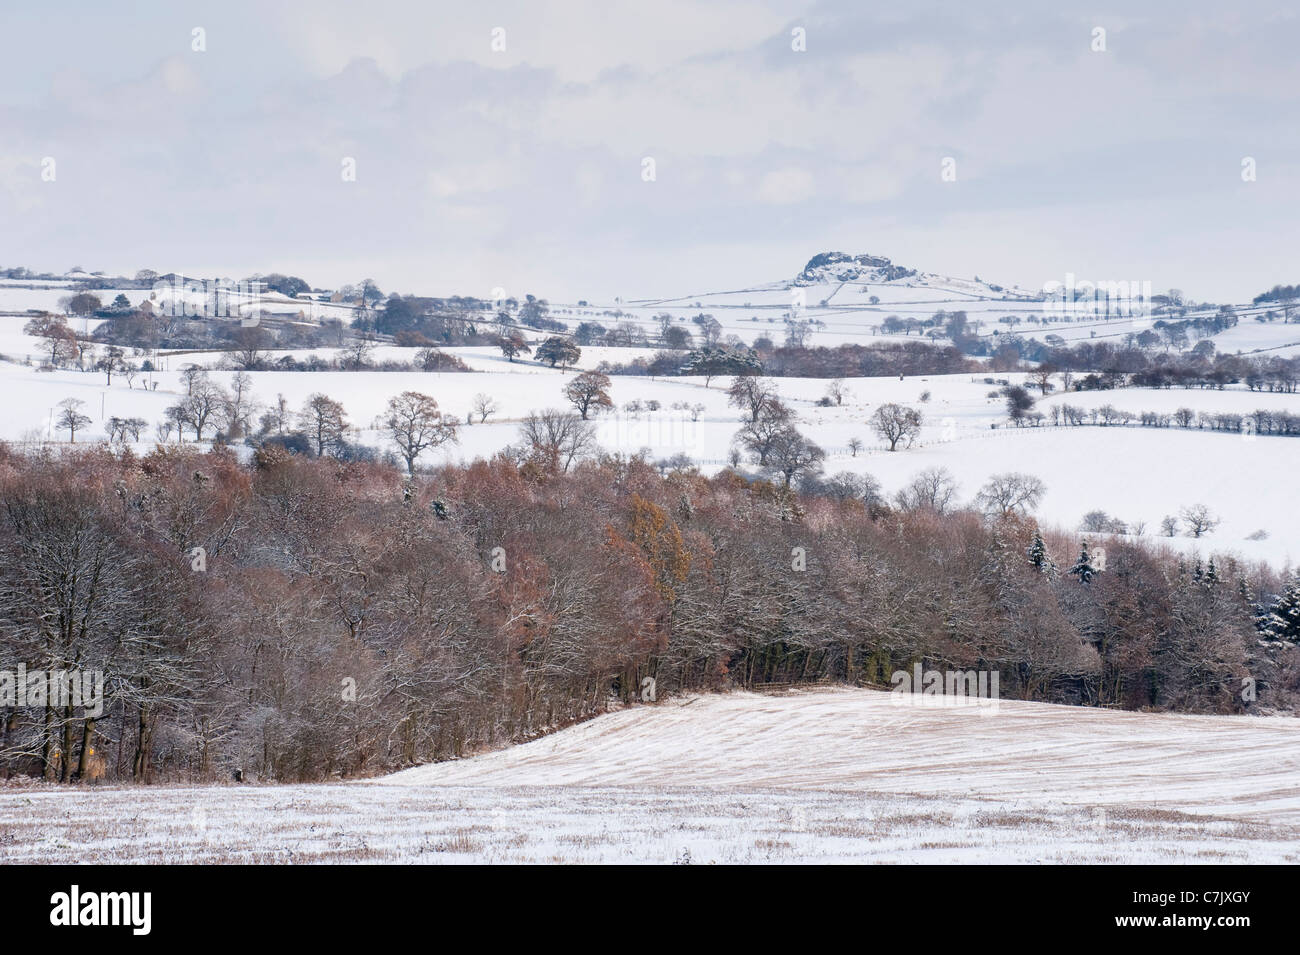 Snowy scenic winter view (snow-covered farmland fields, woodland trees, Almscliffe Crag, distinctive high rocky outcrop) - North Yorkshire, England UK Stock Photo